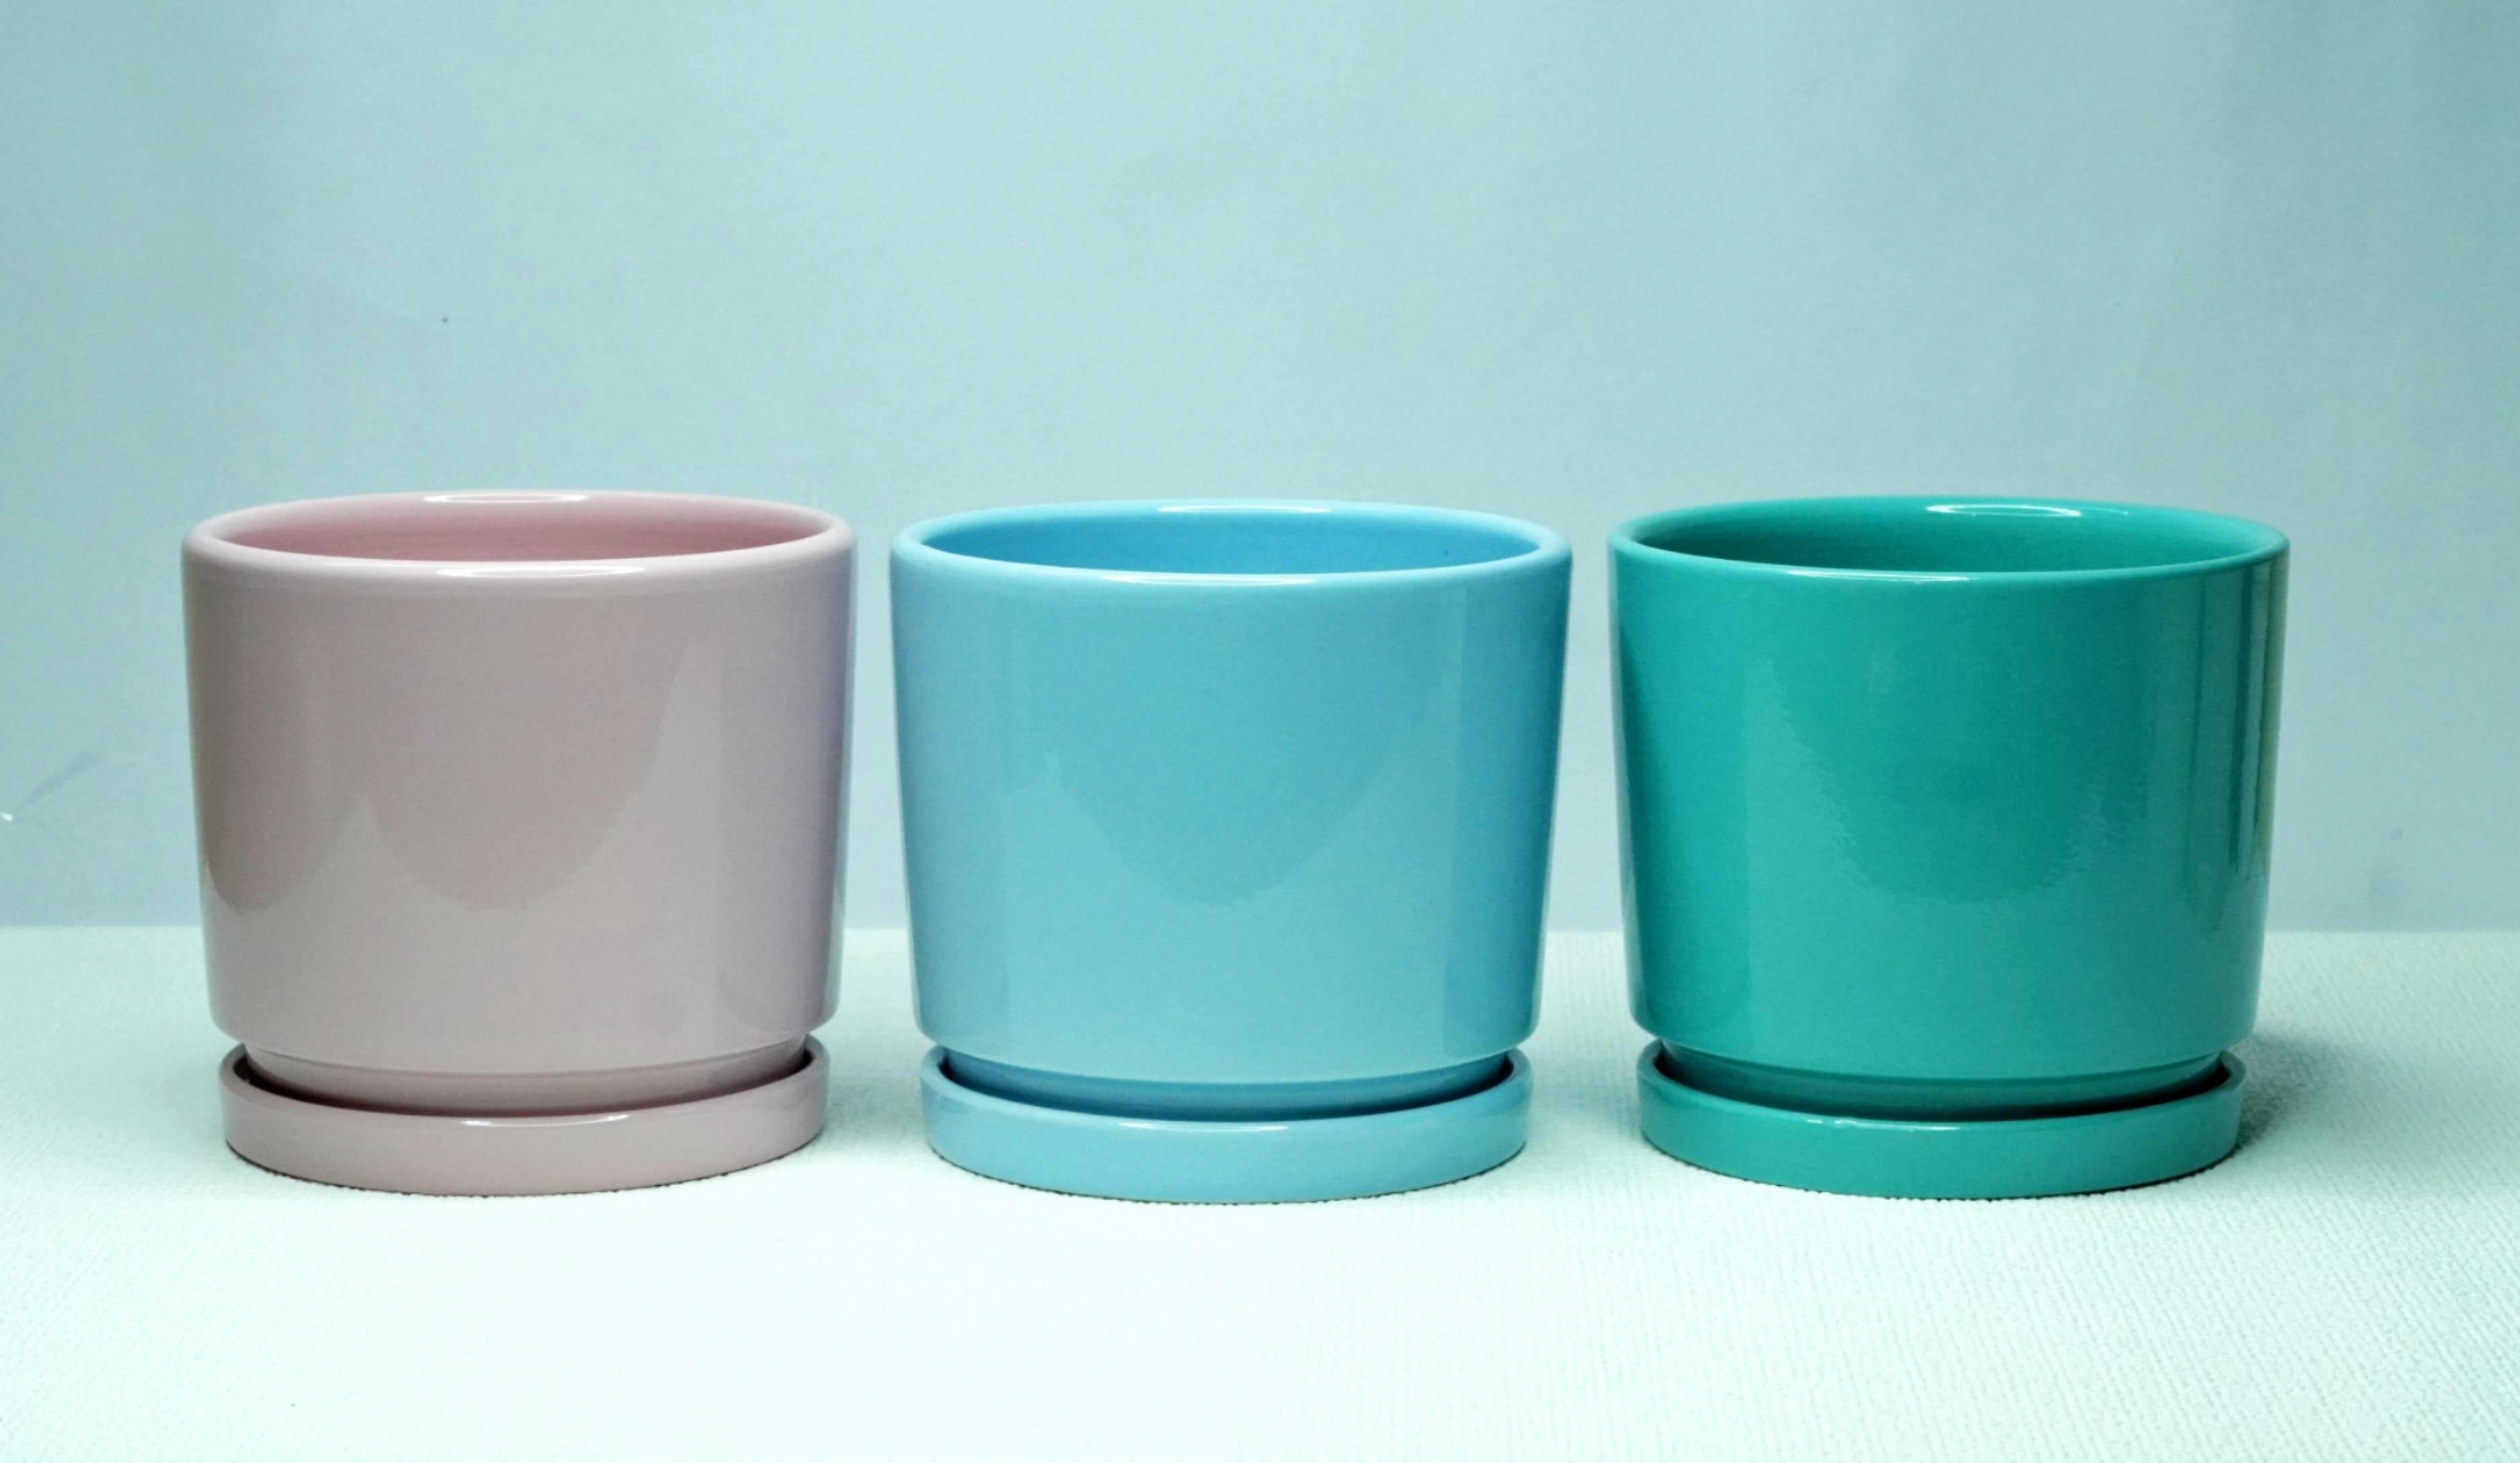 Set of 3 Glossy Baby Pink, Sky Blue, Teal Ceramic Pots 5 inch